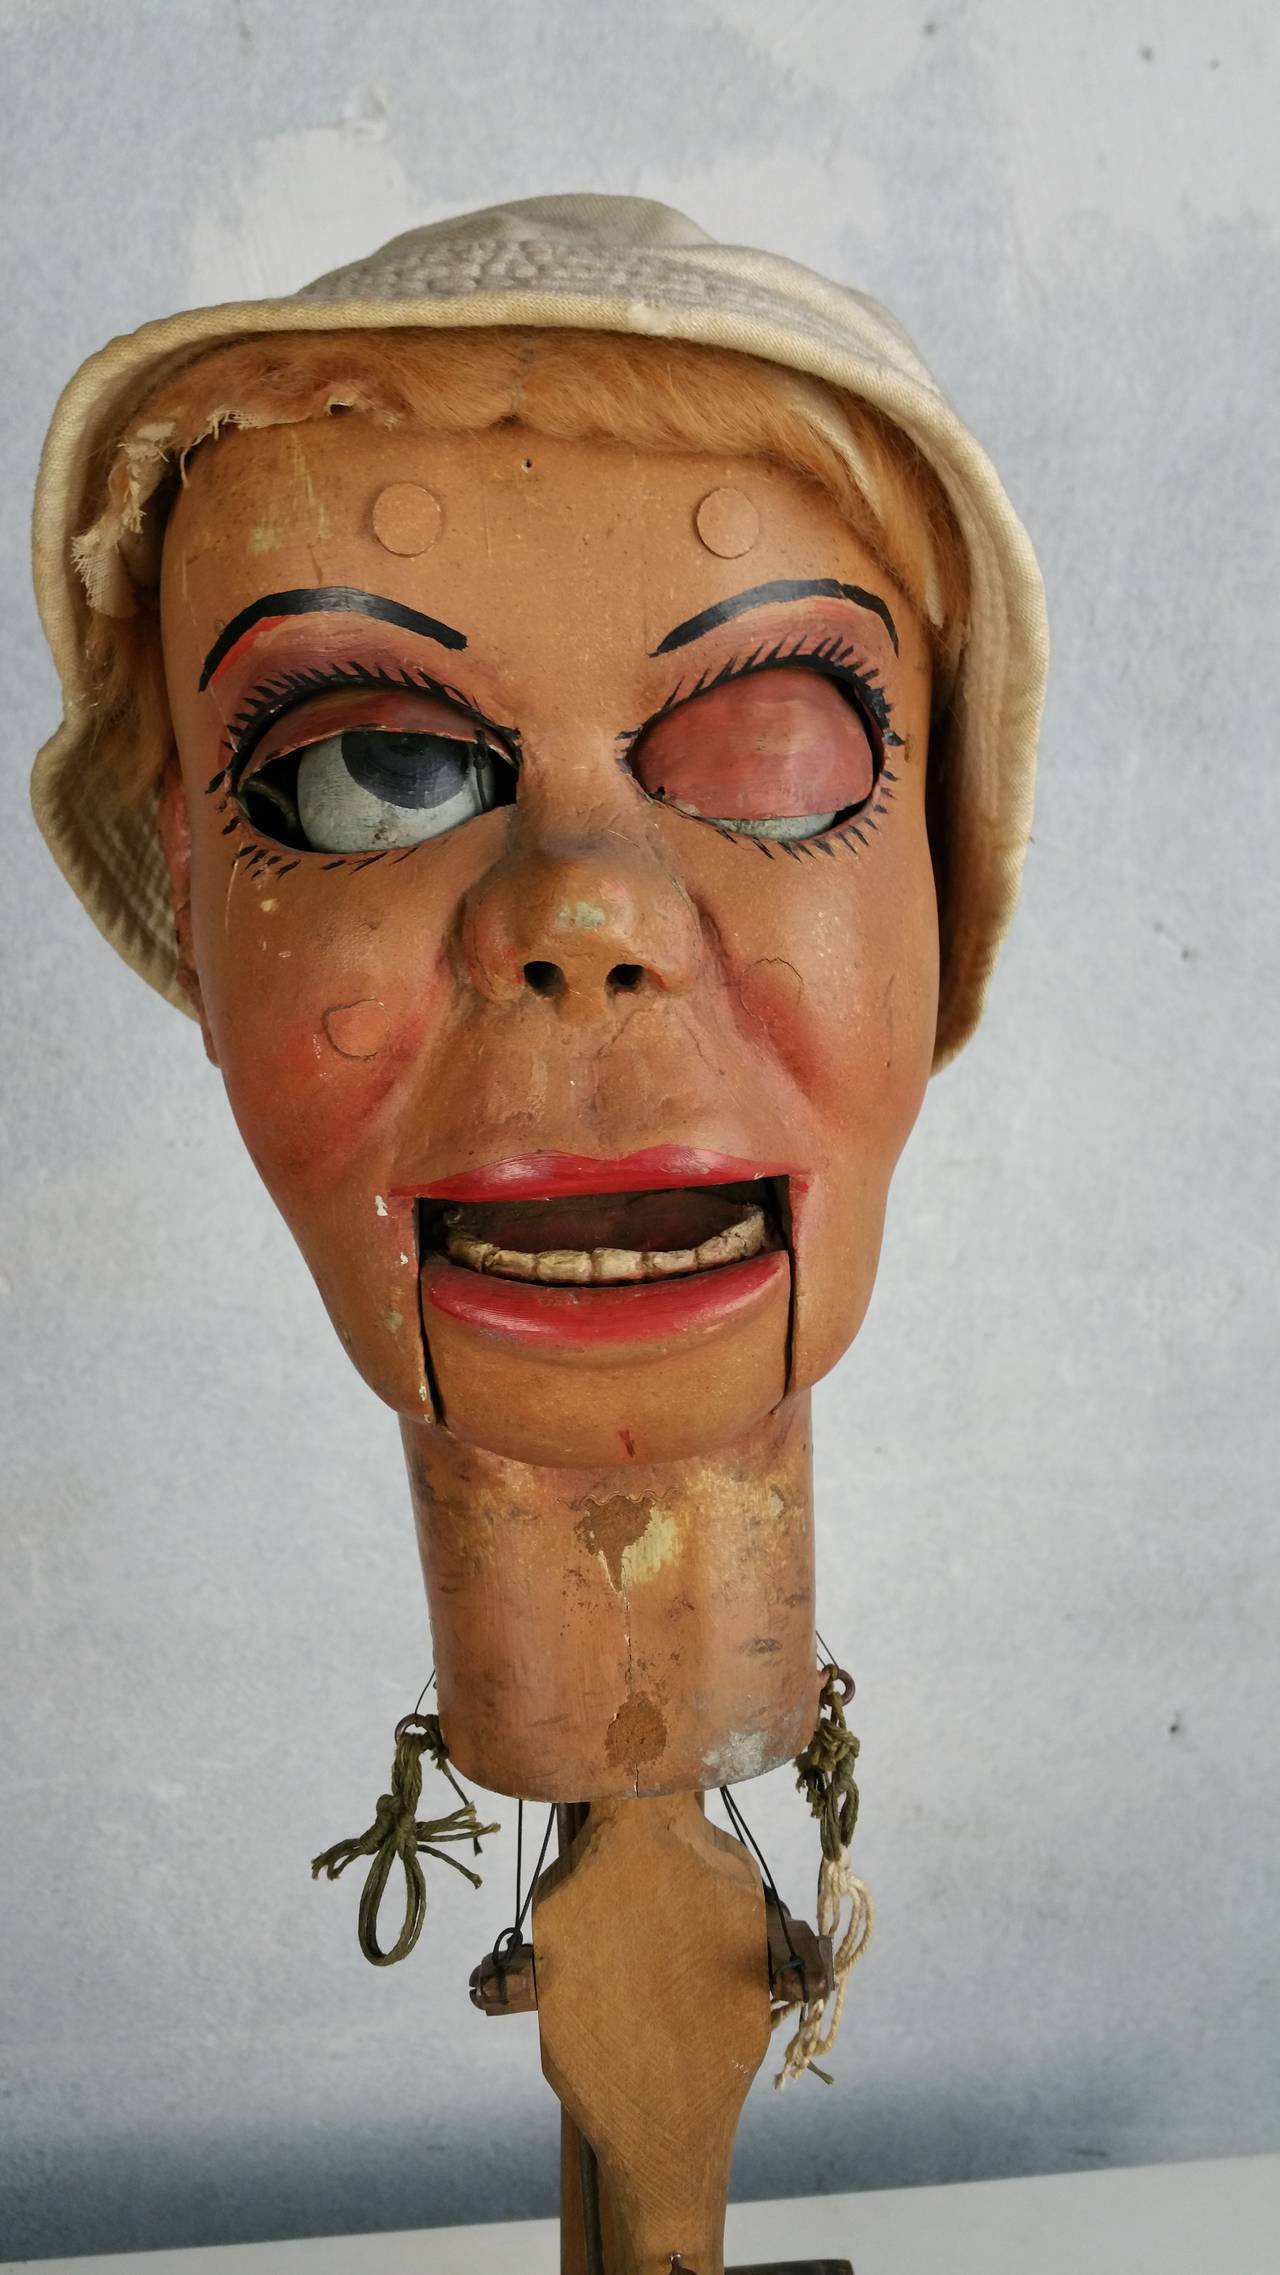 Folk Art Early Ventriloquist Doll Head with Moving Eyes, Eyebrows, and Mouth